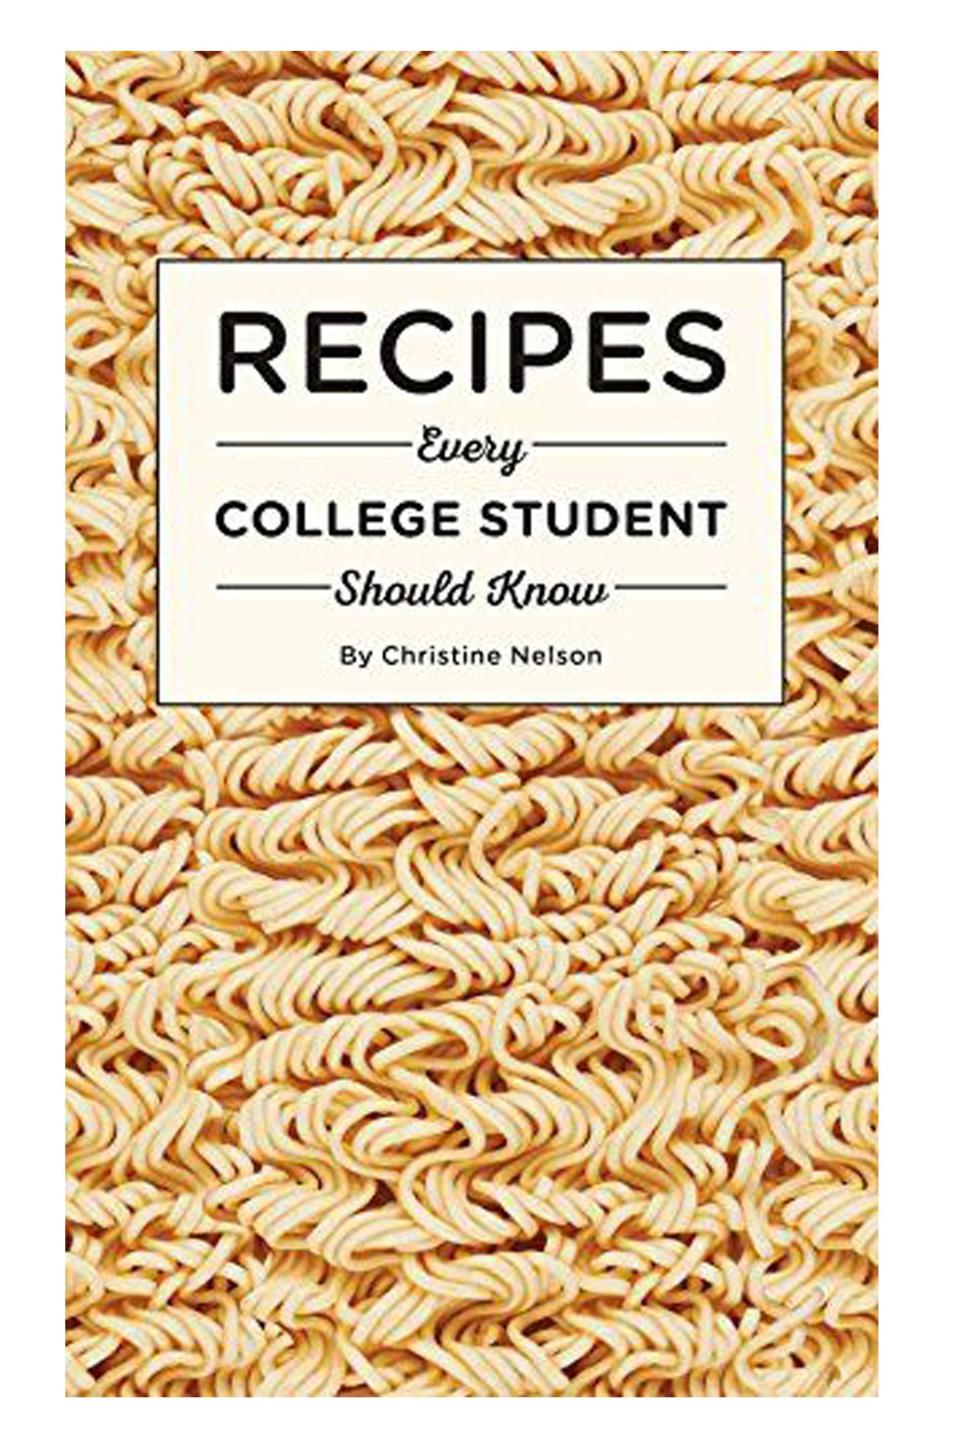 29) Recipes Every College Student Should Know